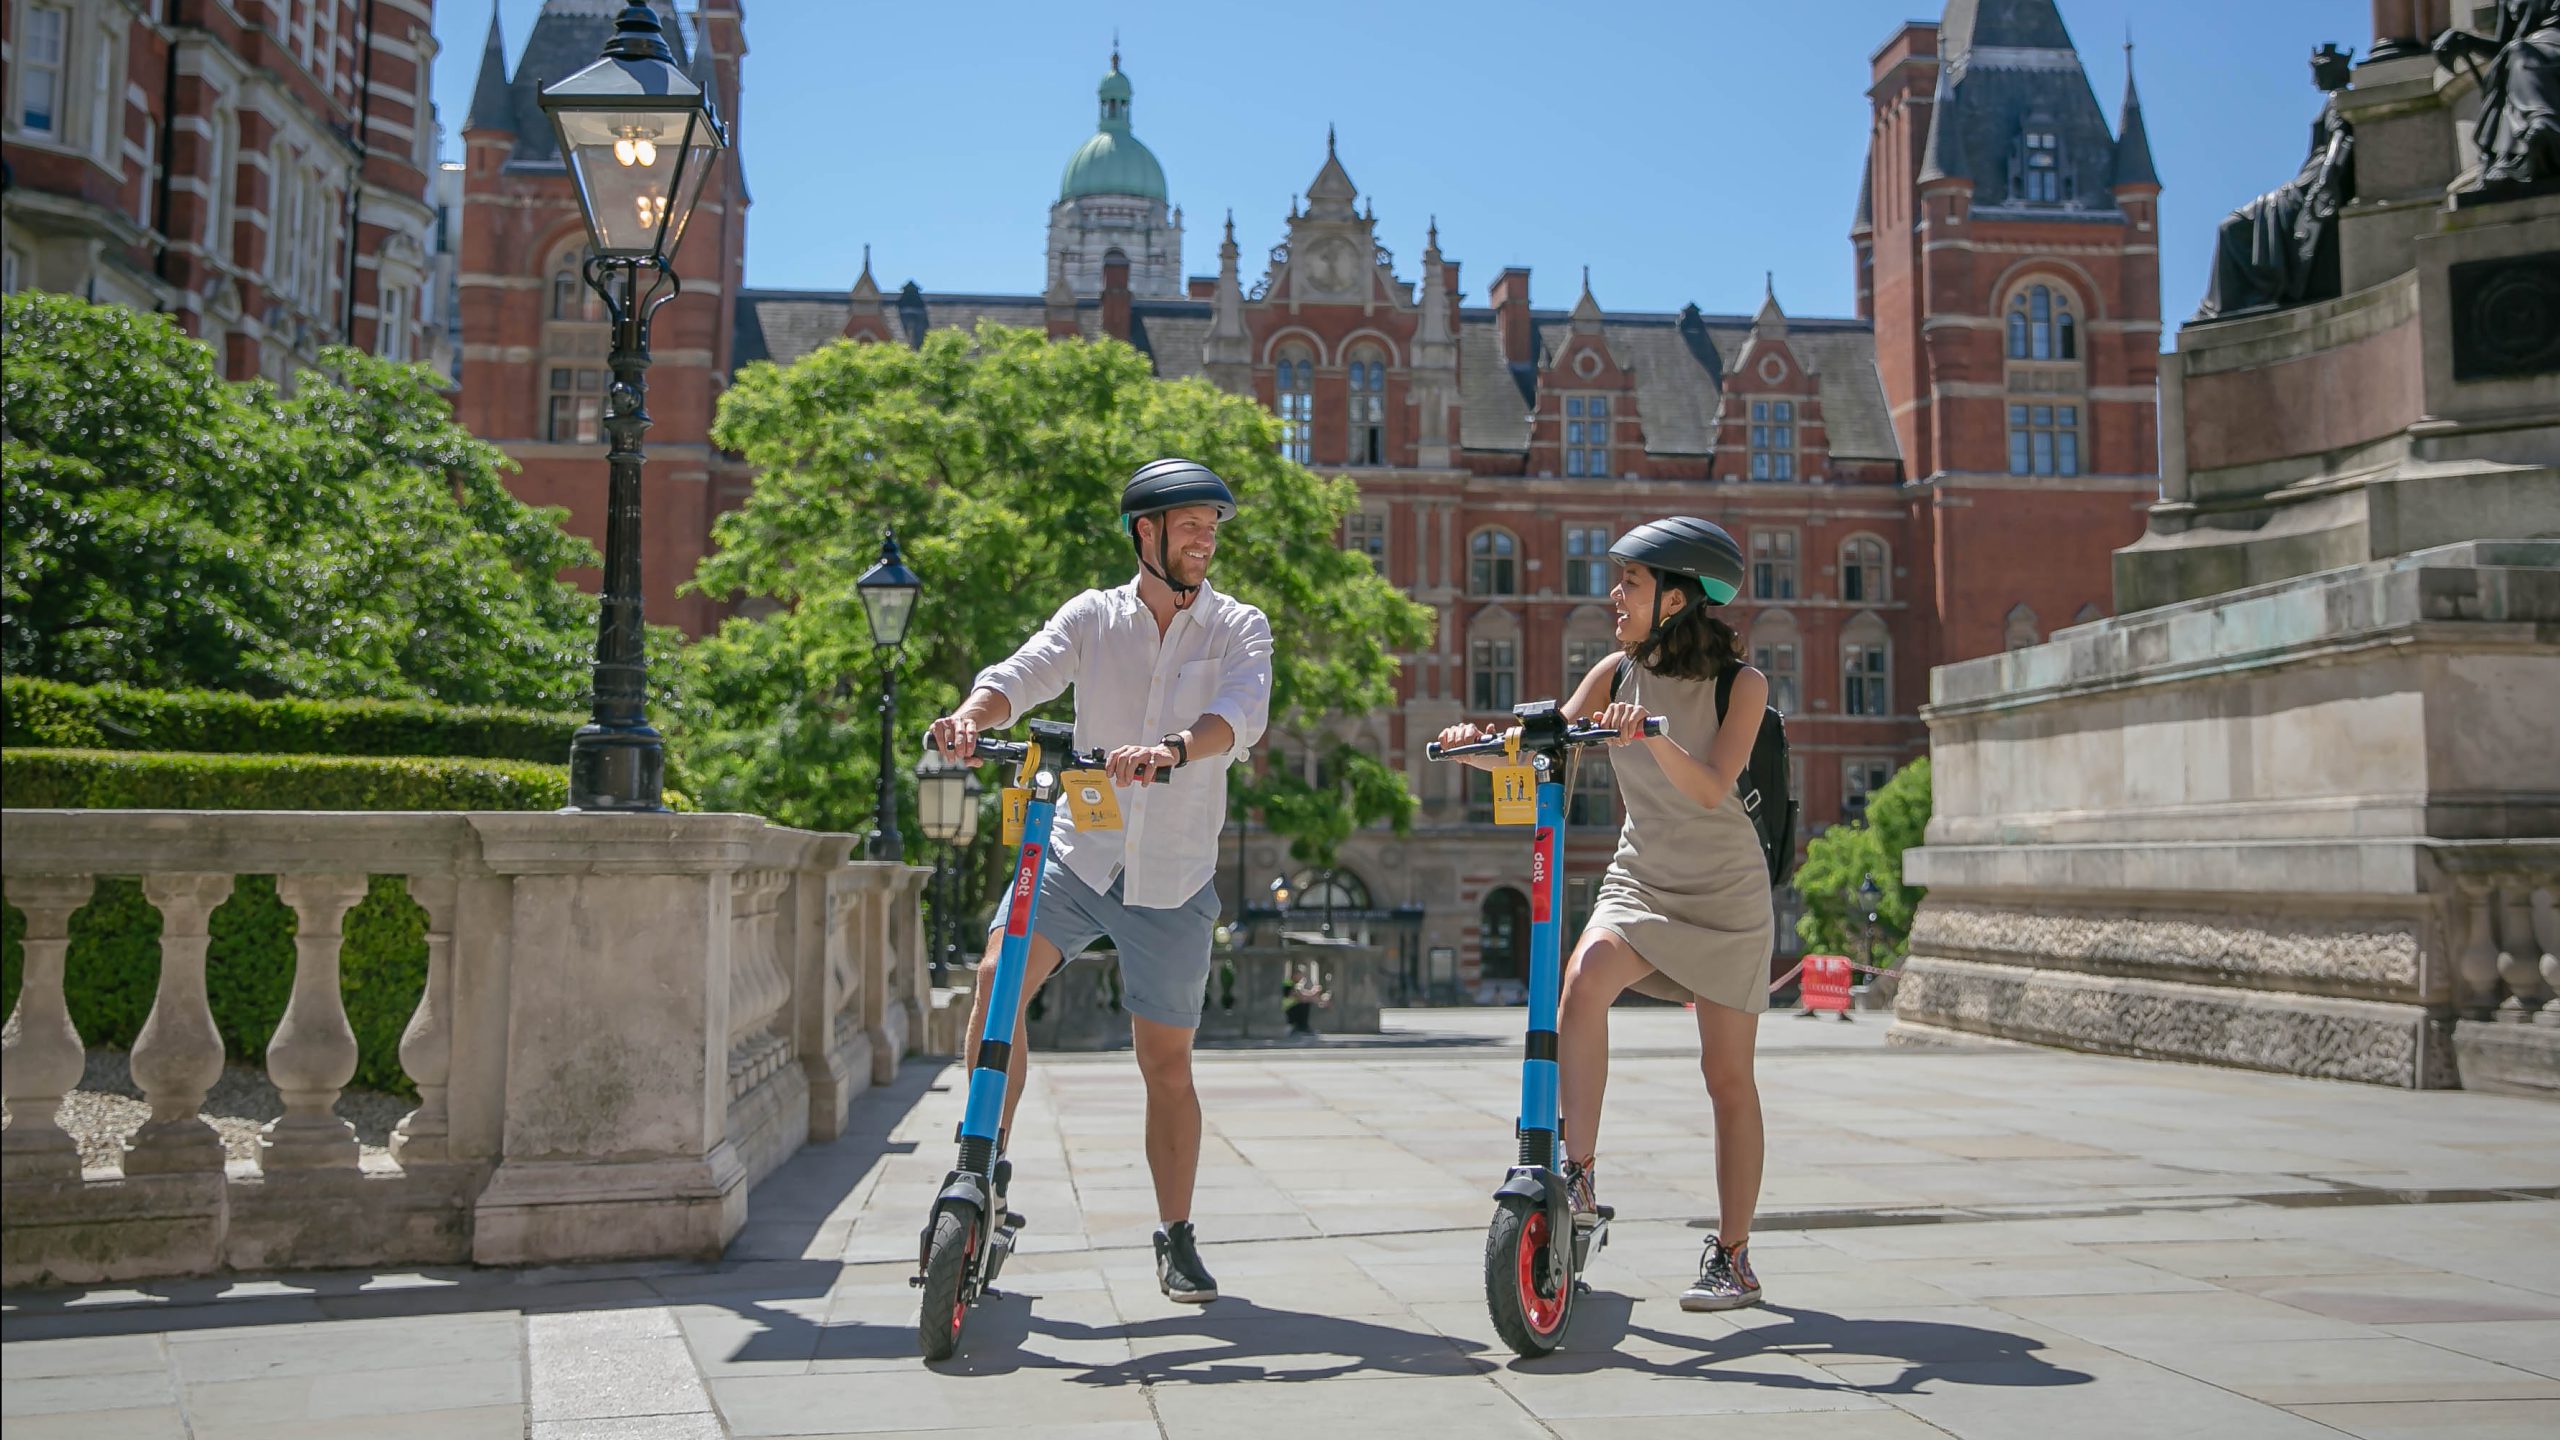 A man and a woman wearing helmets stand smiling and casually holding their Dott scooters while they talk to each other. The sun shines on the grand buildings behind them.